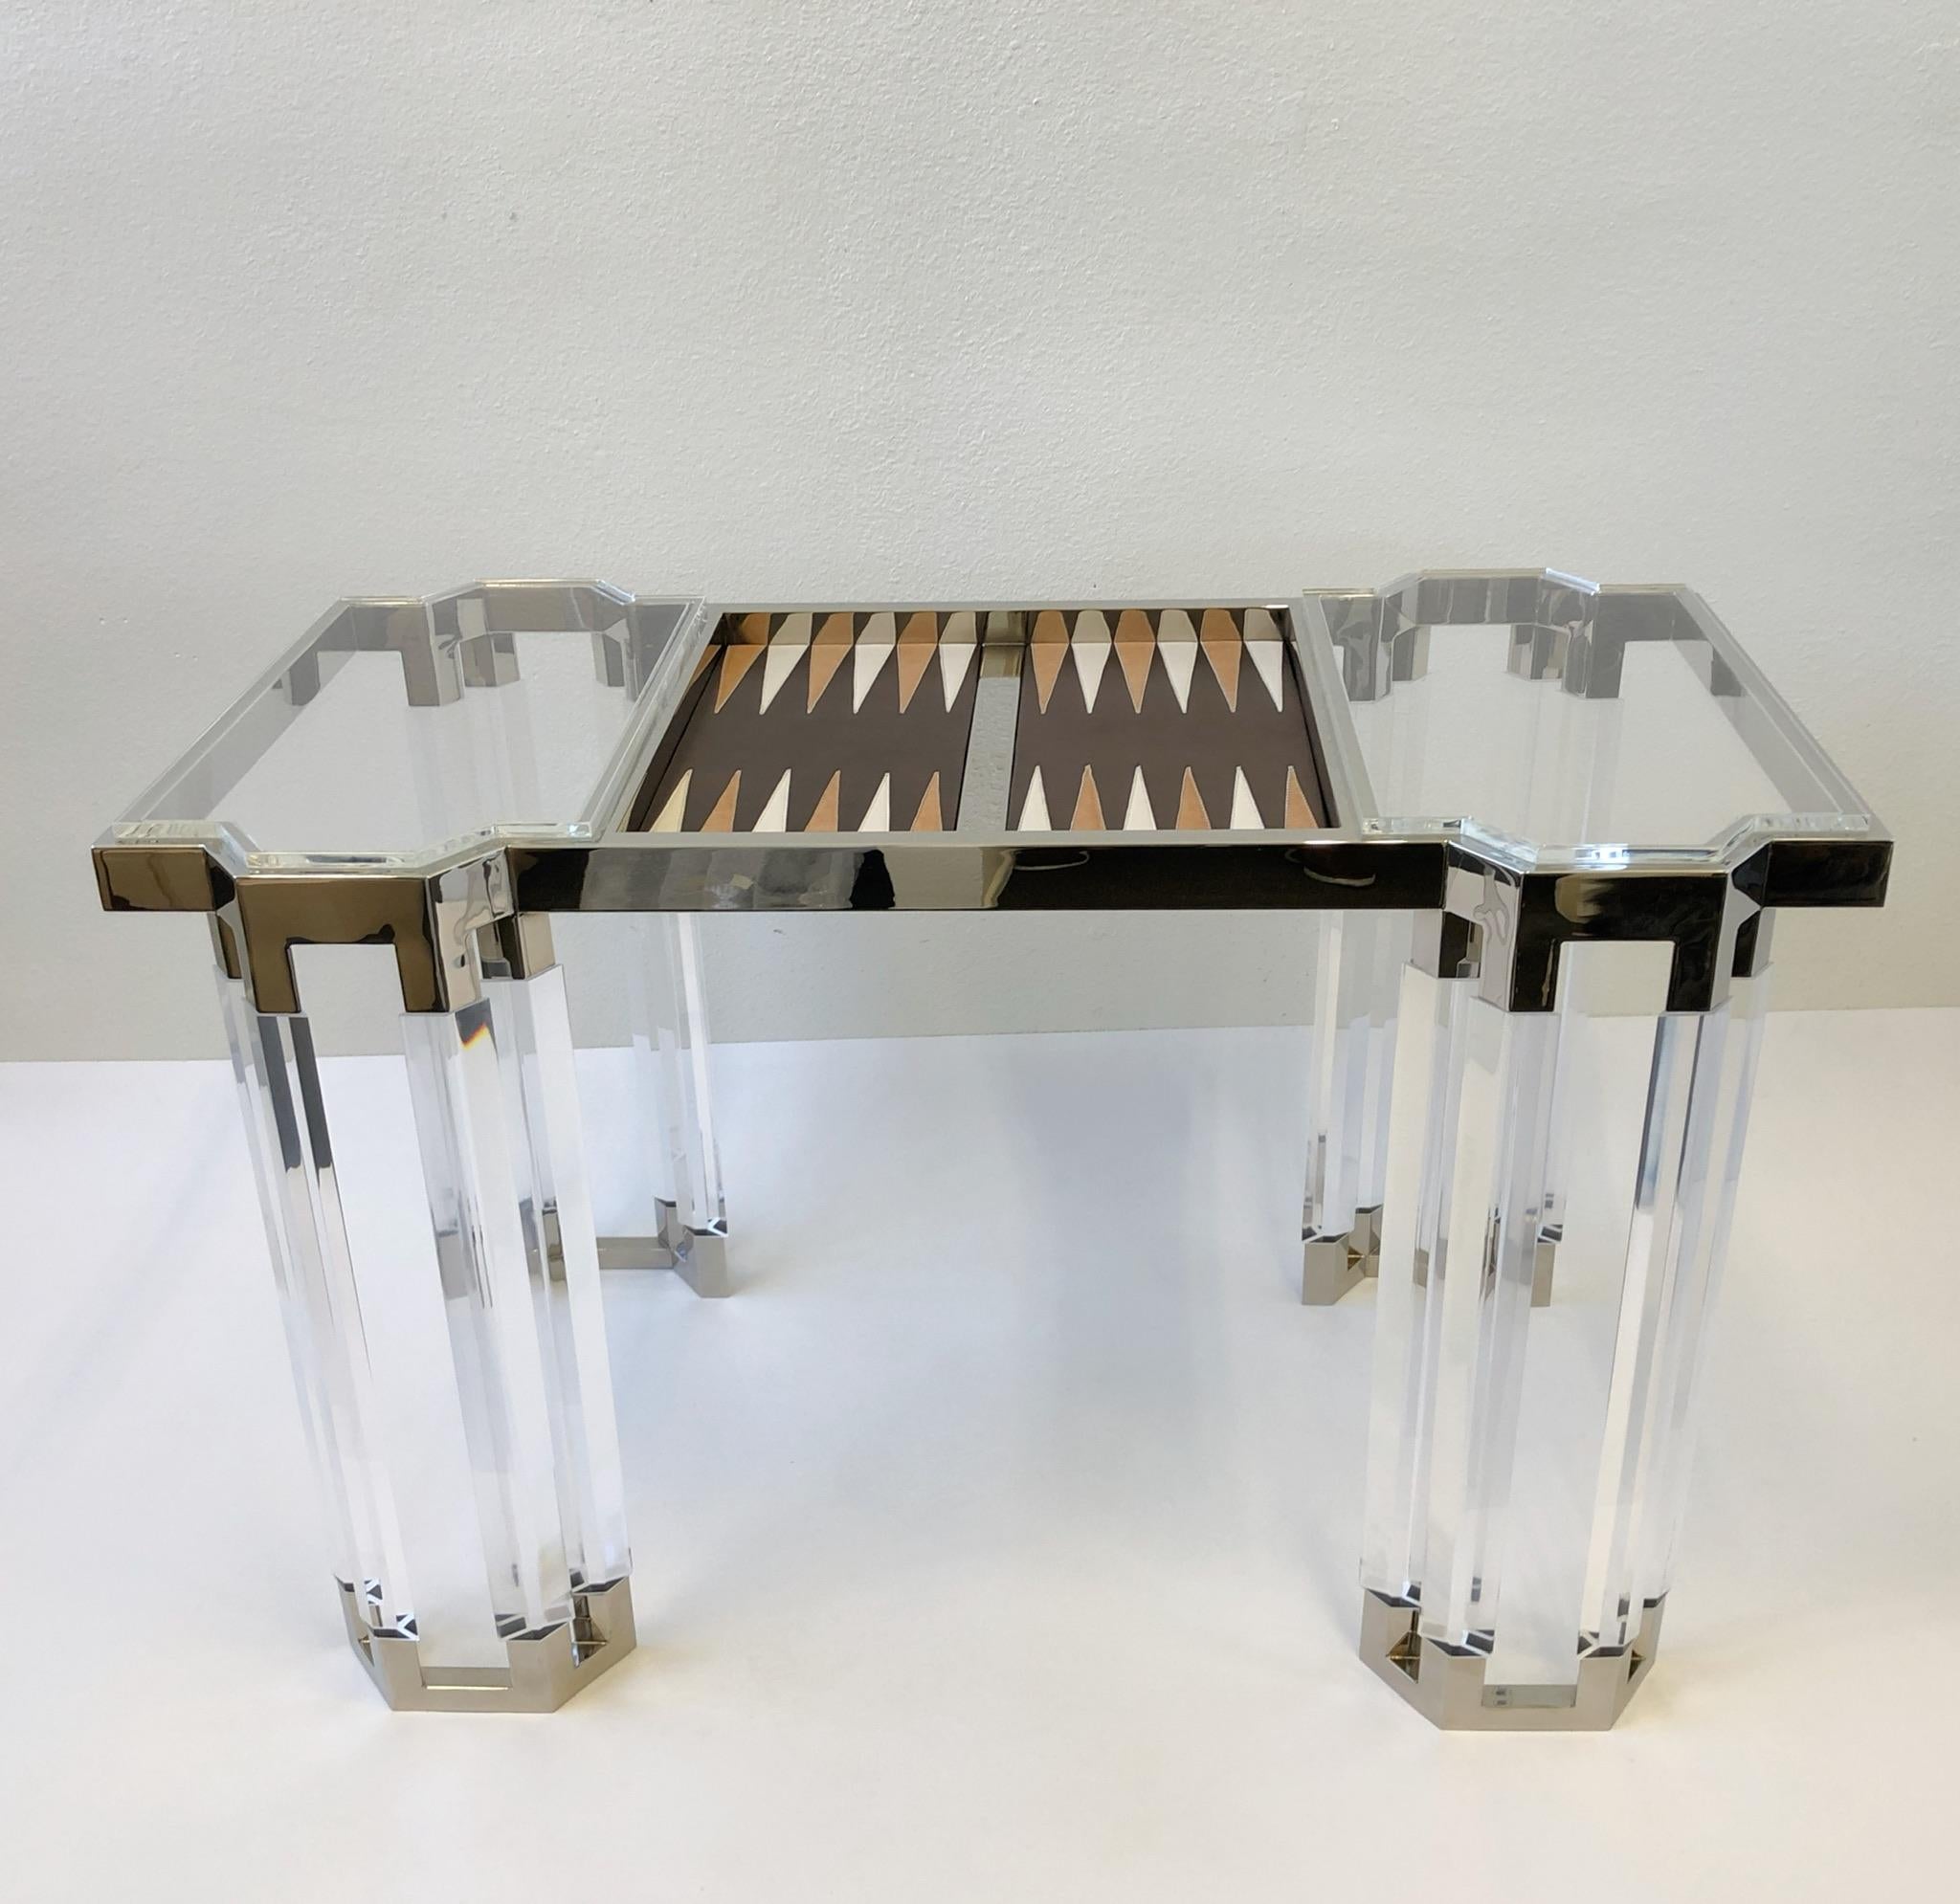 A studio clear Lucite and polish nickel backgammon table by renowned American designer Charles Hollis Jones. The table is part of his “Connection Diamond Line” the legs are diamond shape acrylic. The backgammon board is chocolate brown, off-white